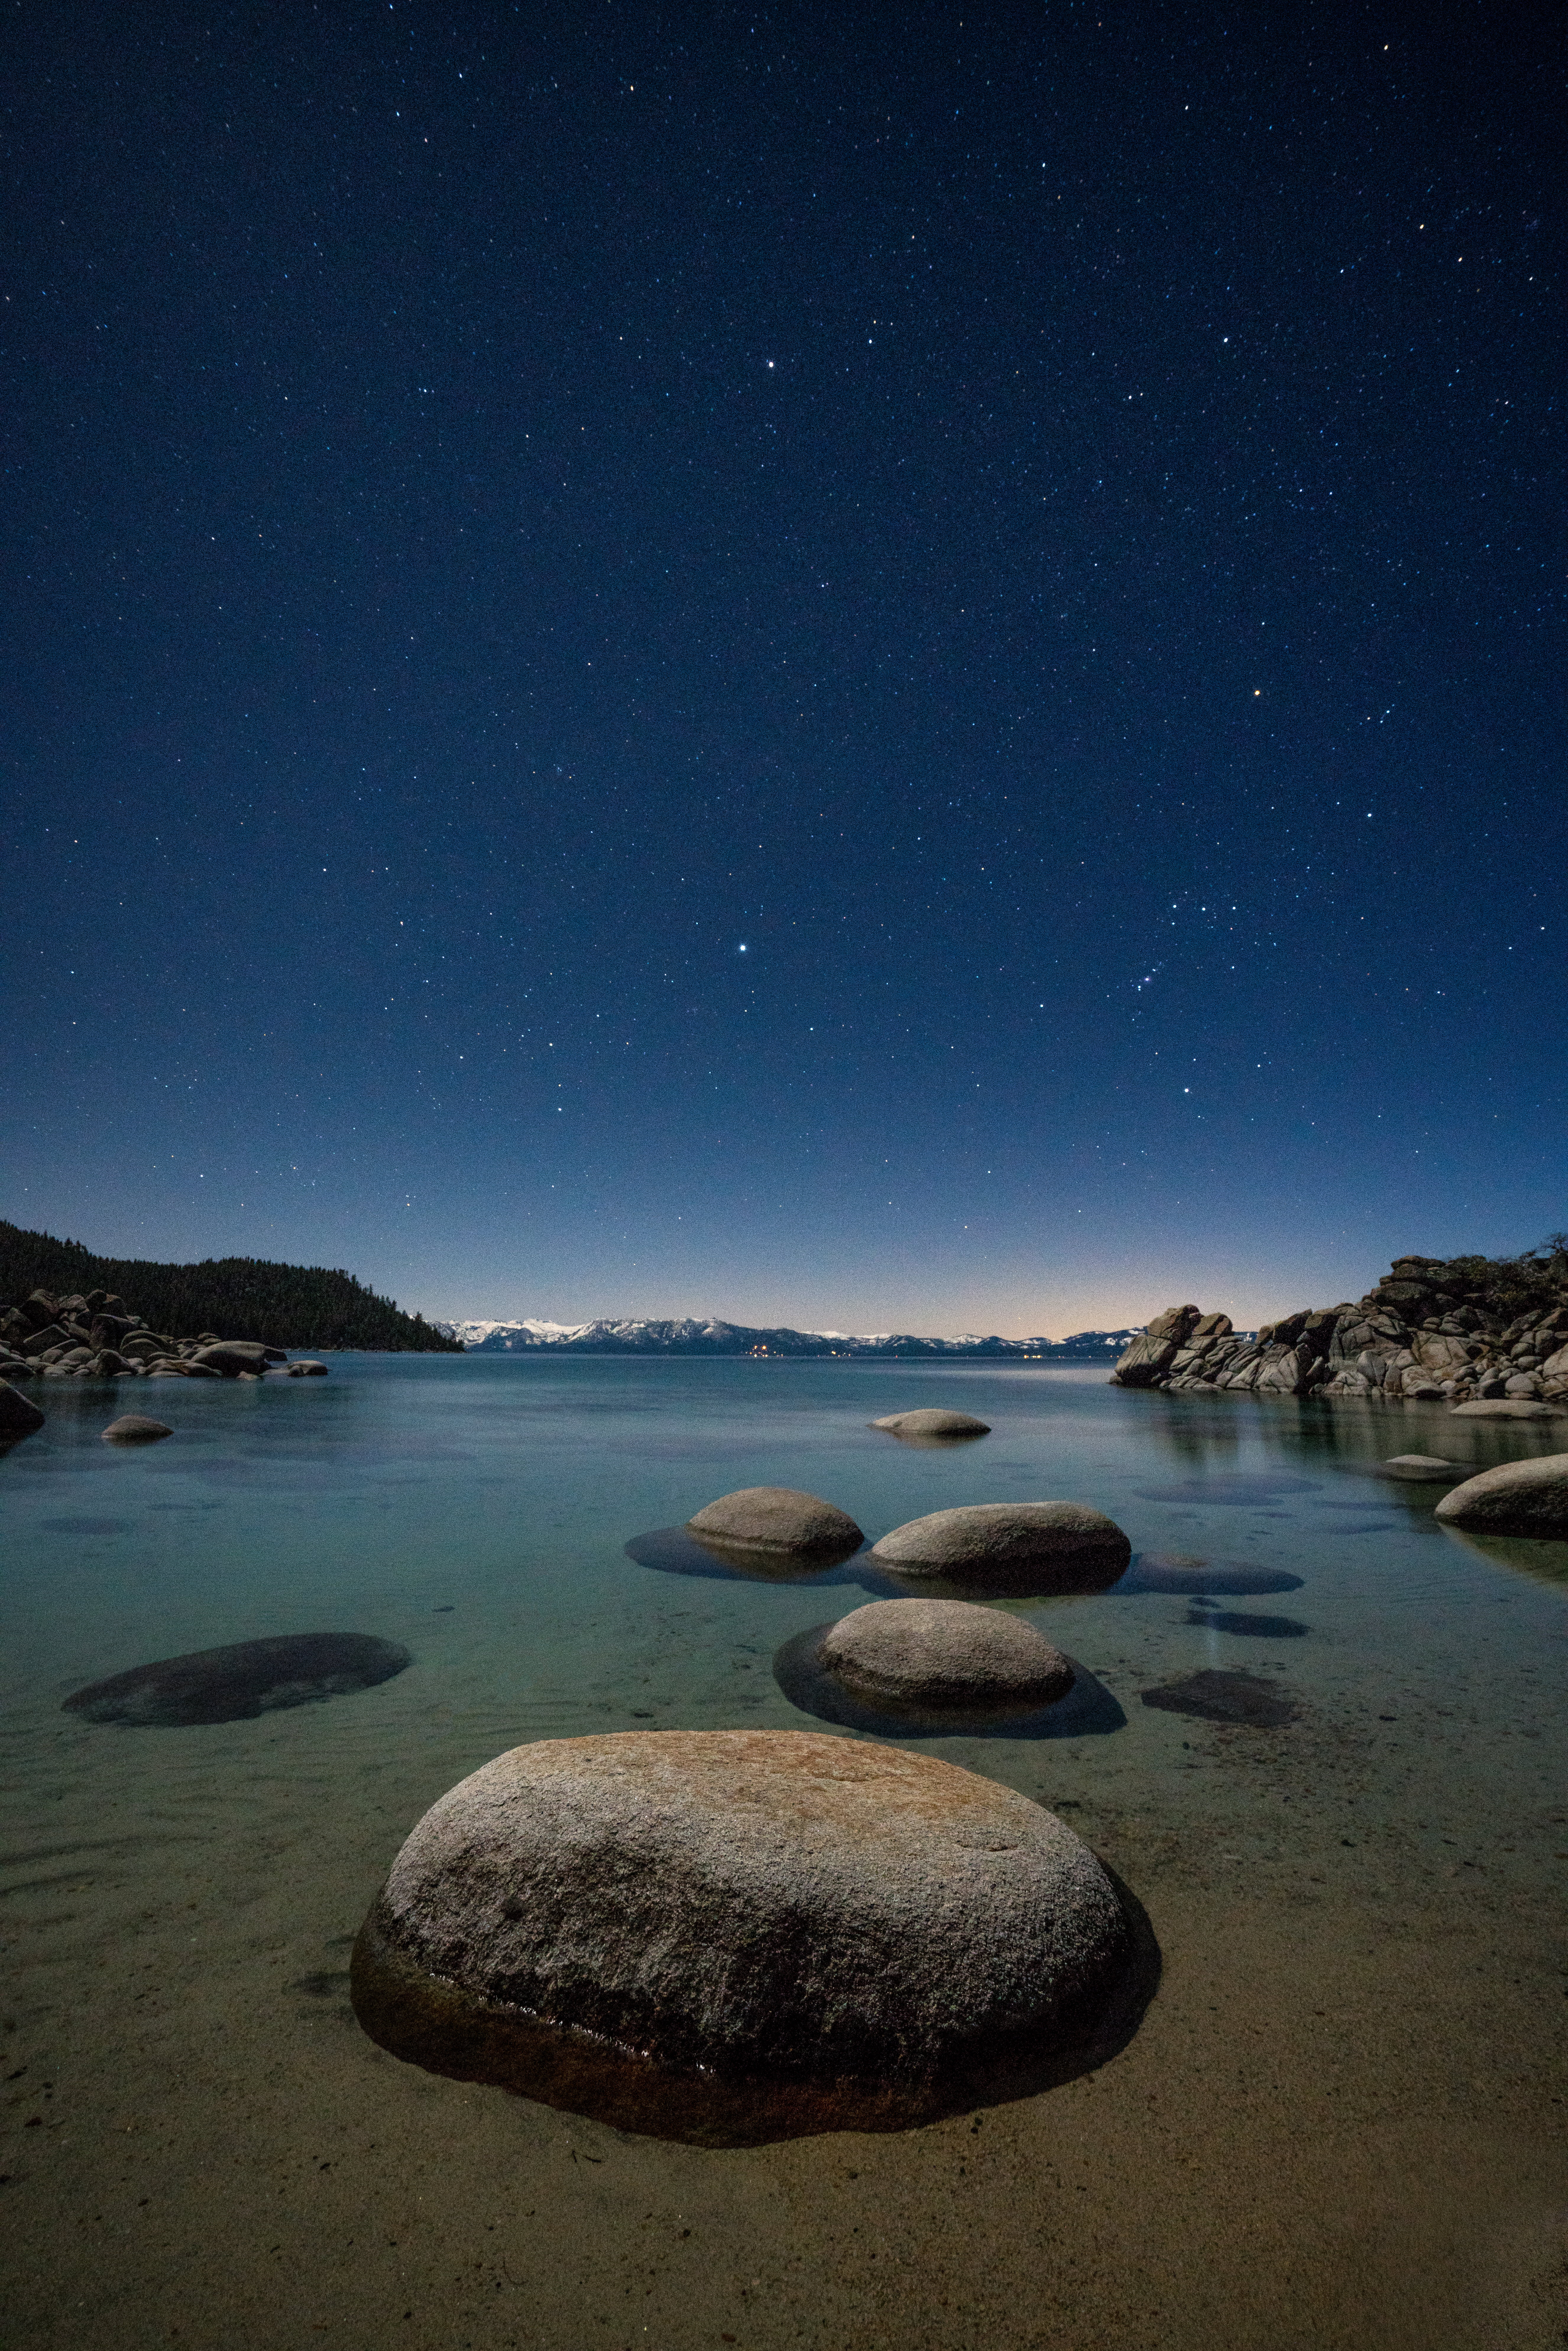 landscape photography of boulders on body of water during night time, lake tahoe